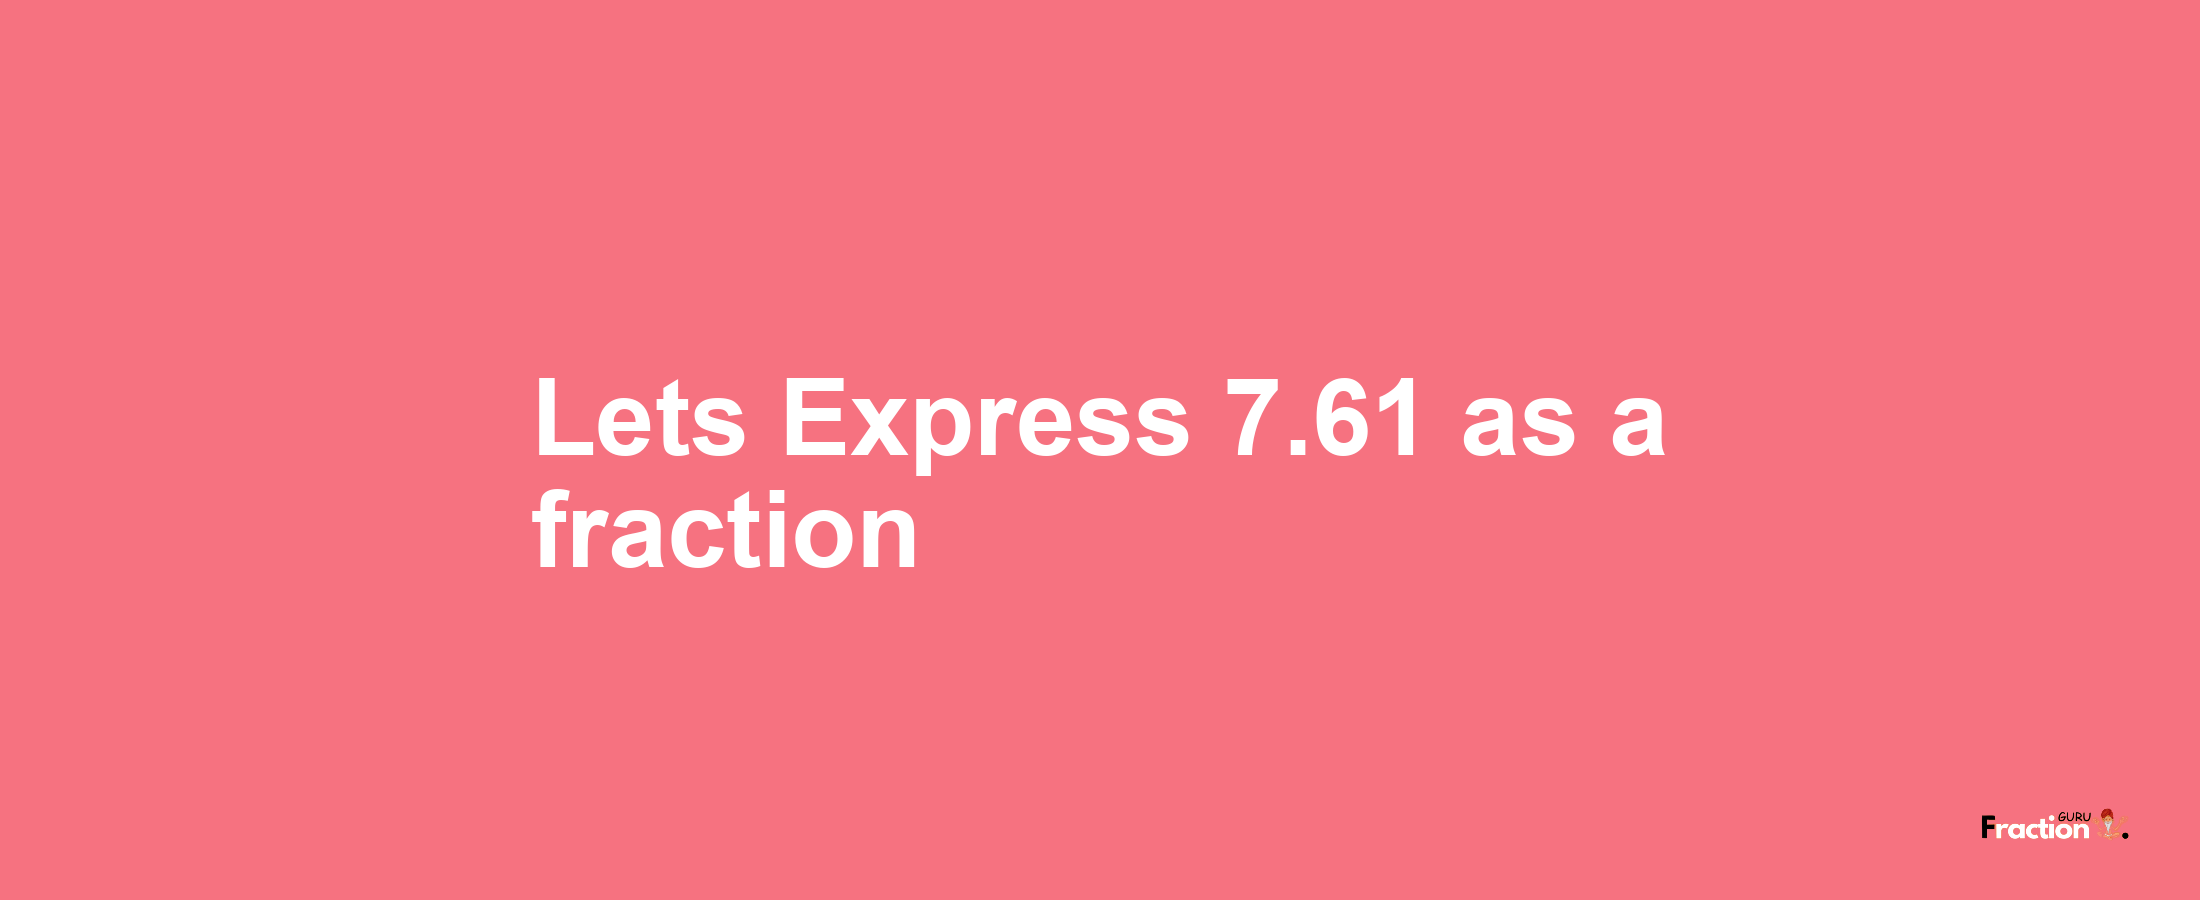 Lets Express 7.61 as afraction